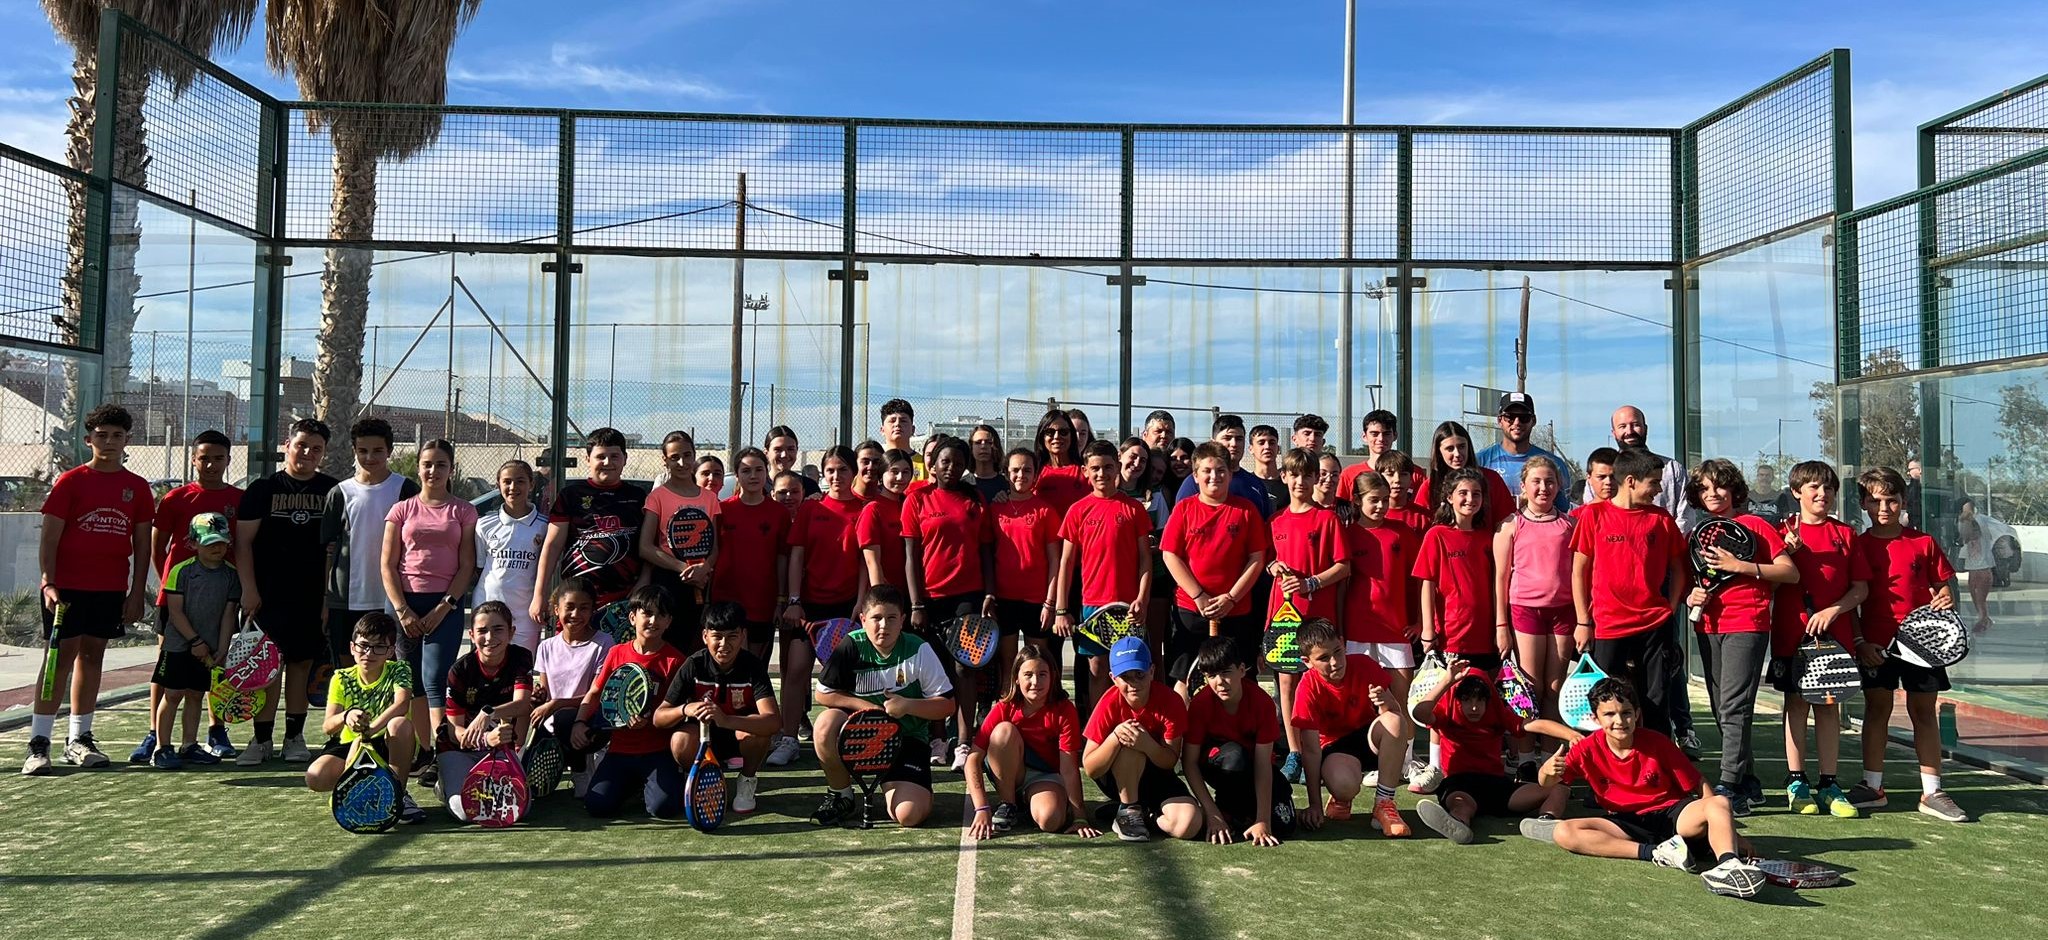 The Mojácar paddle tennis school, part of the locality’s Municipal Sports School, has held a teambuilding day on the municipal La Mata courts with the Cuevas del Almanzora municipal paddle tennis school.